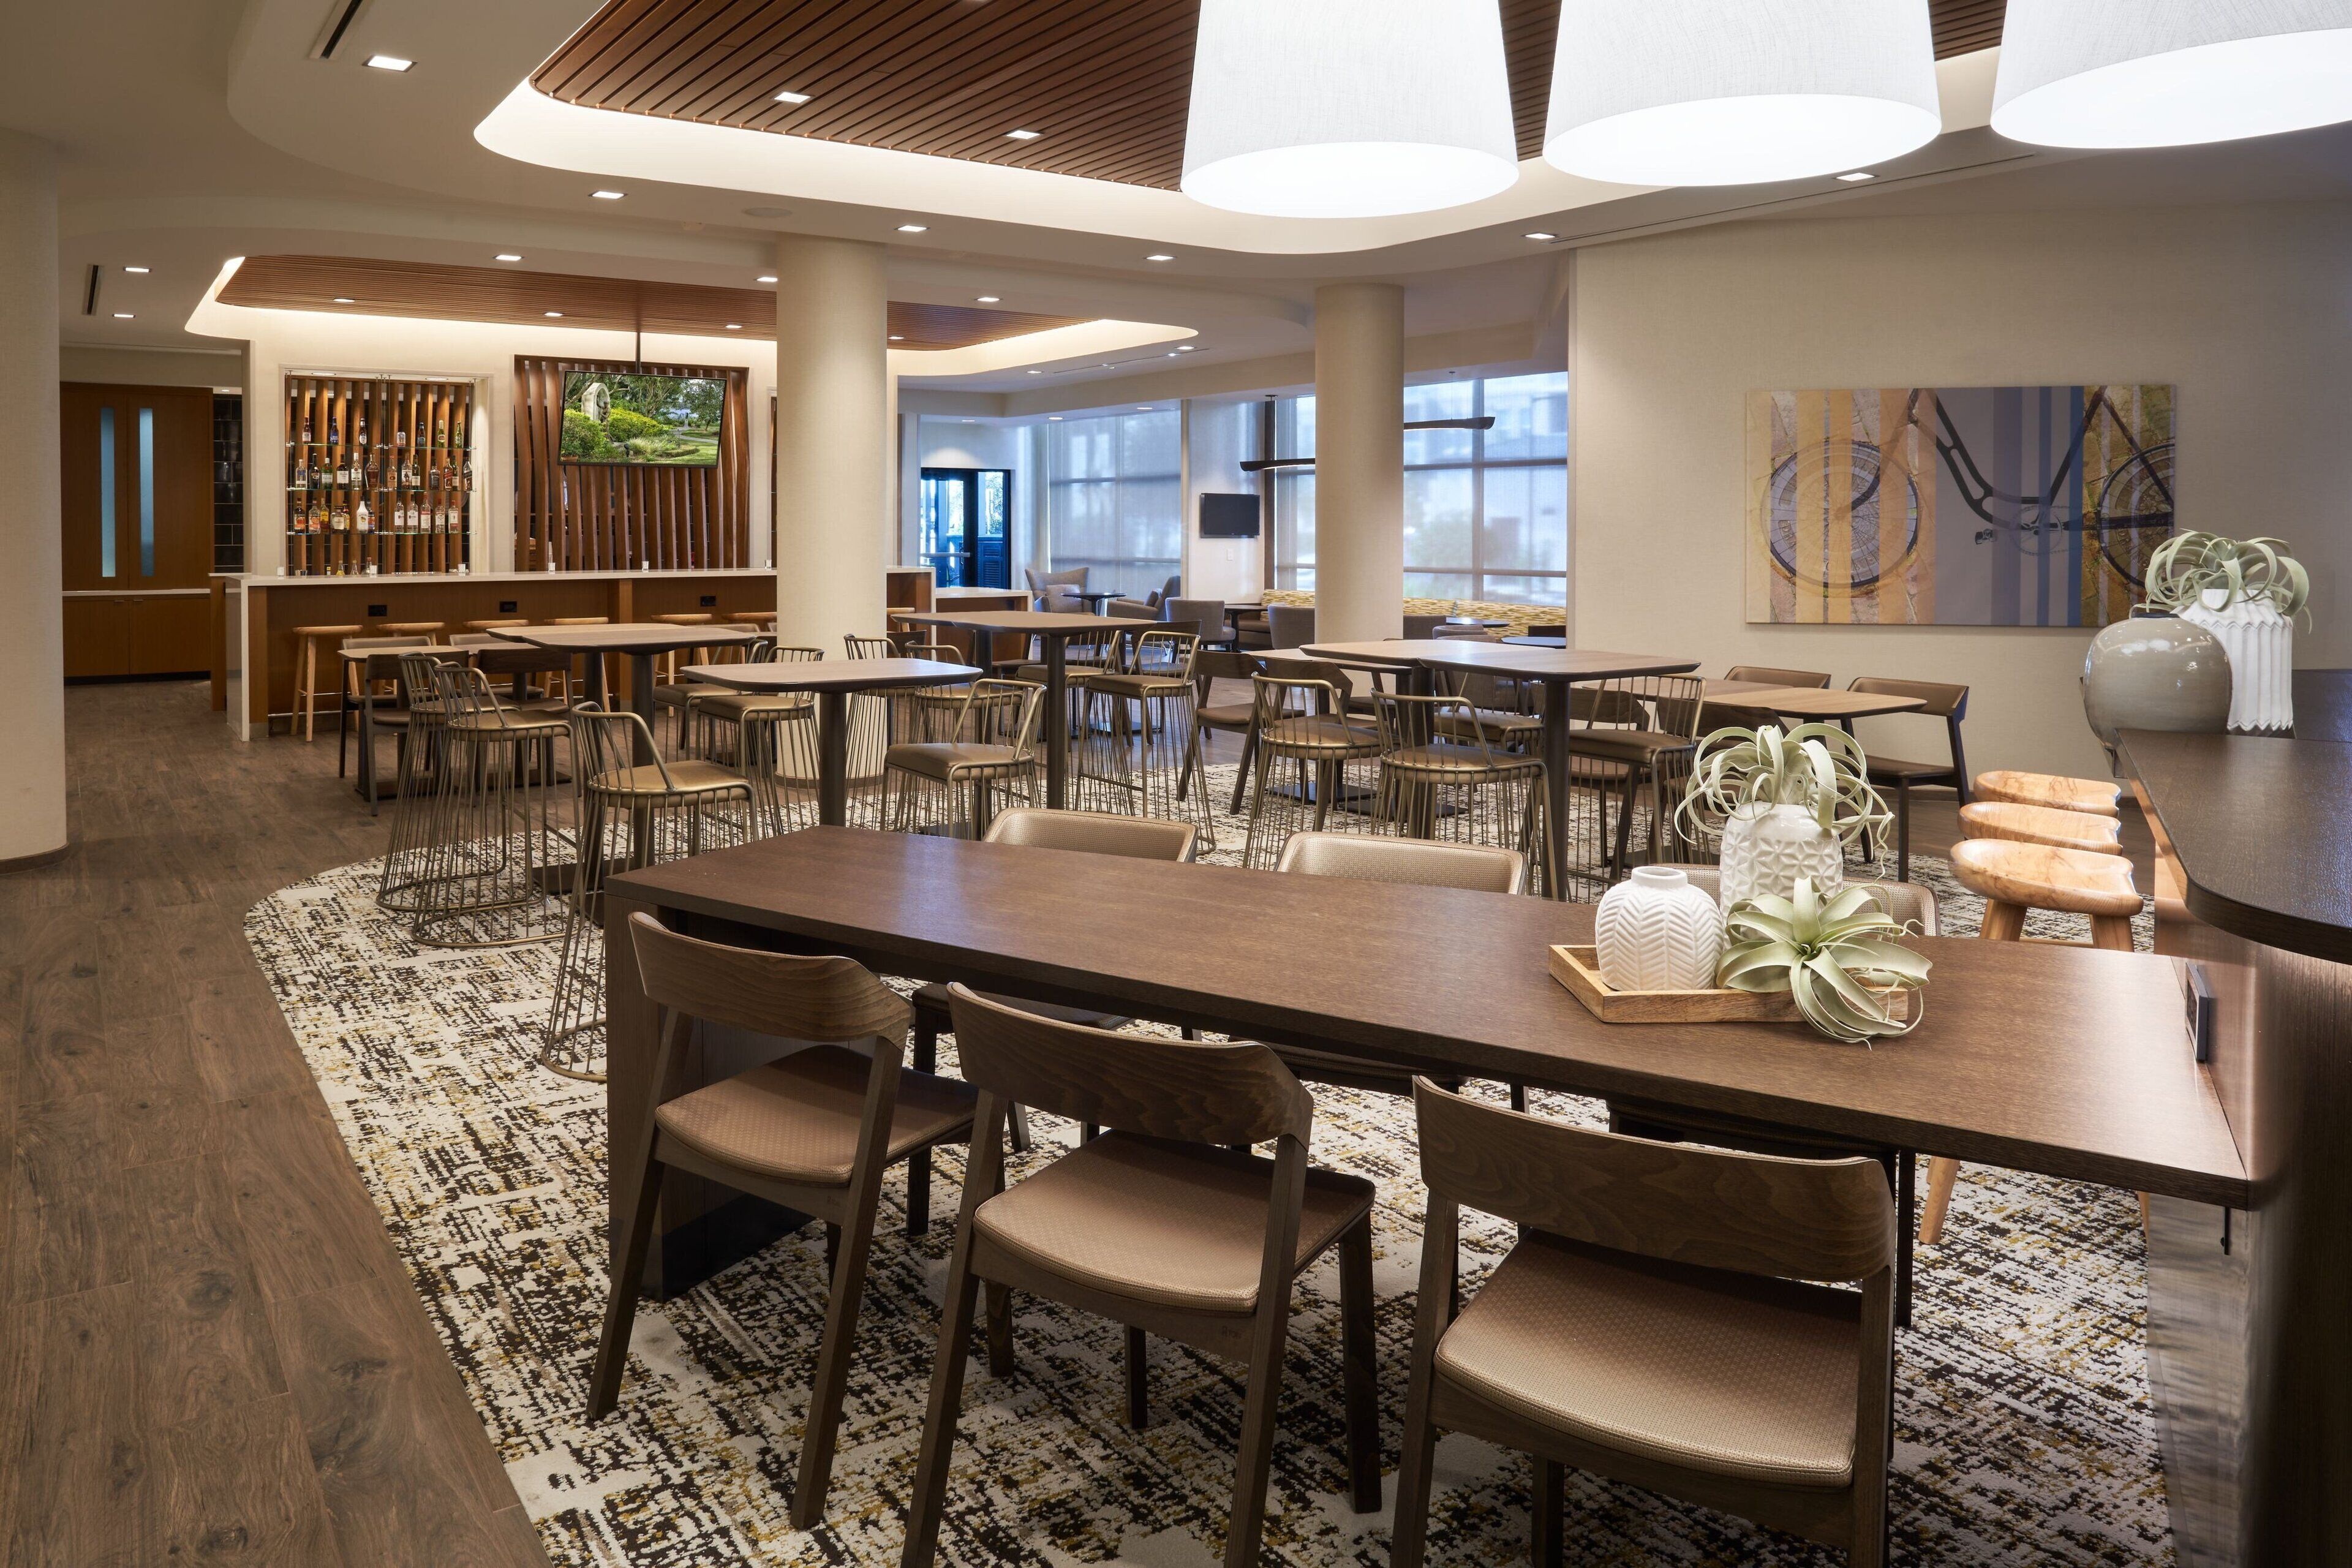 SpringHill Suites by Marriott Winter Park